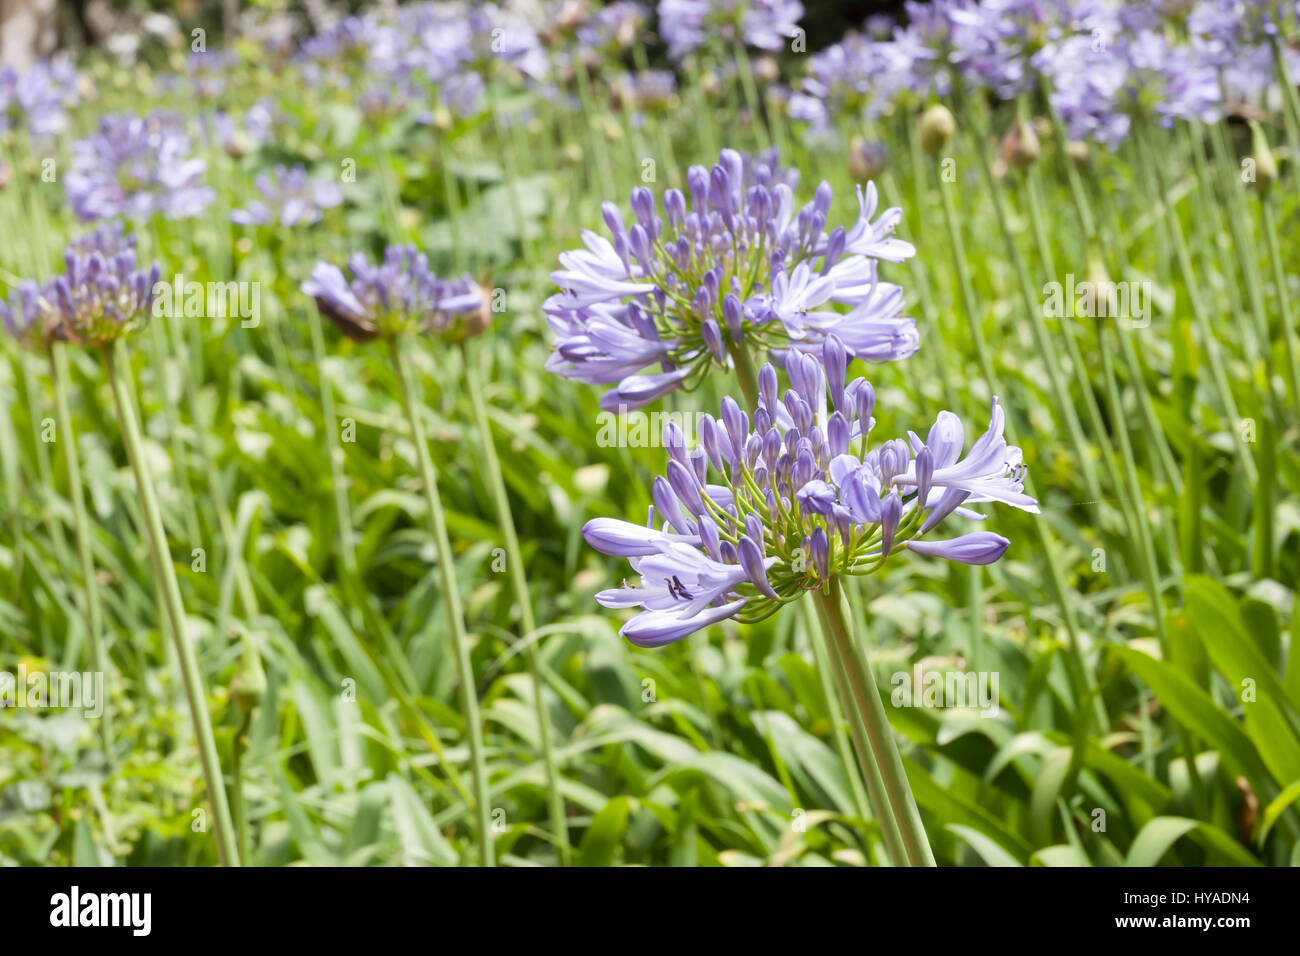 Blue african lily, agapanthus africanus flowers in a garden Stock Photo